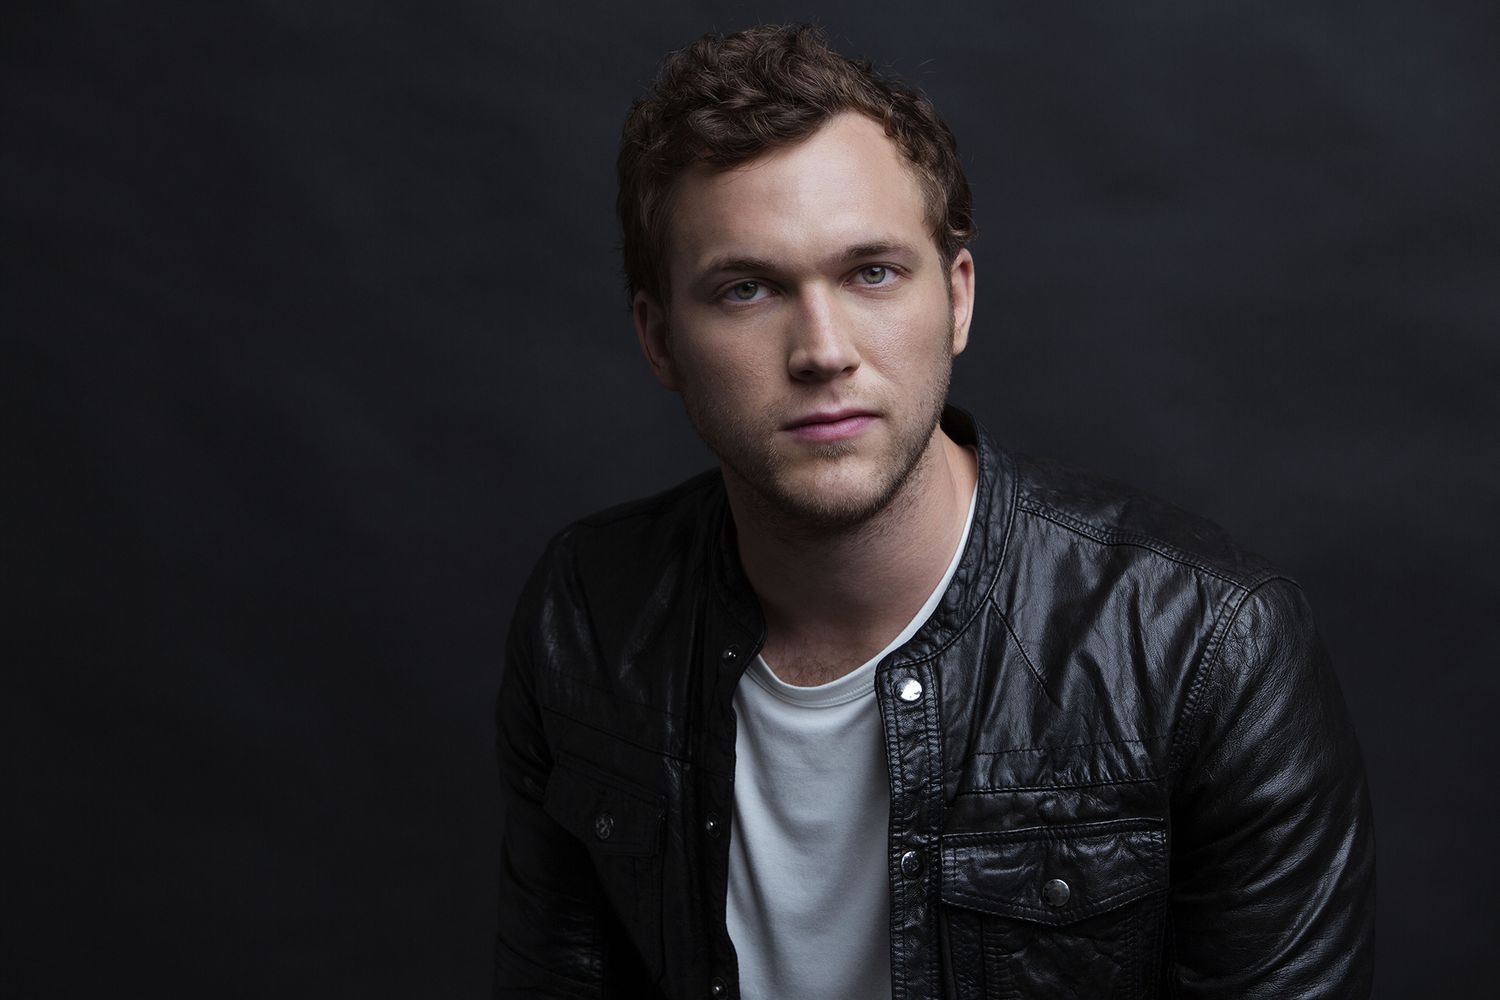 46 Facts About Phillip Phillips - Facts.net